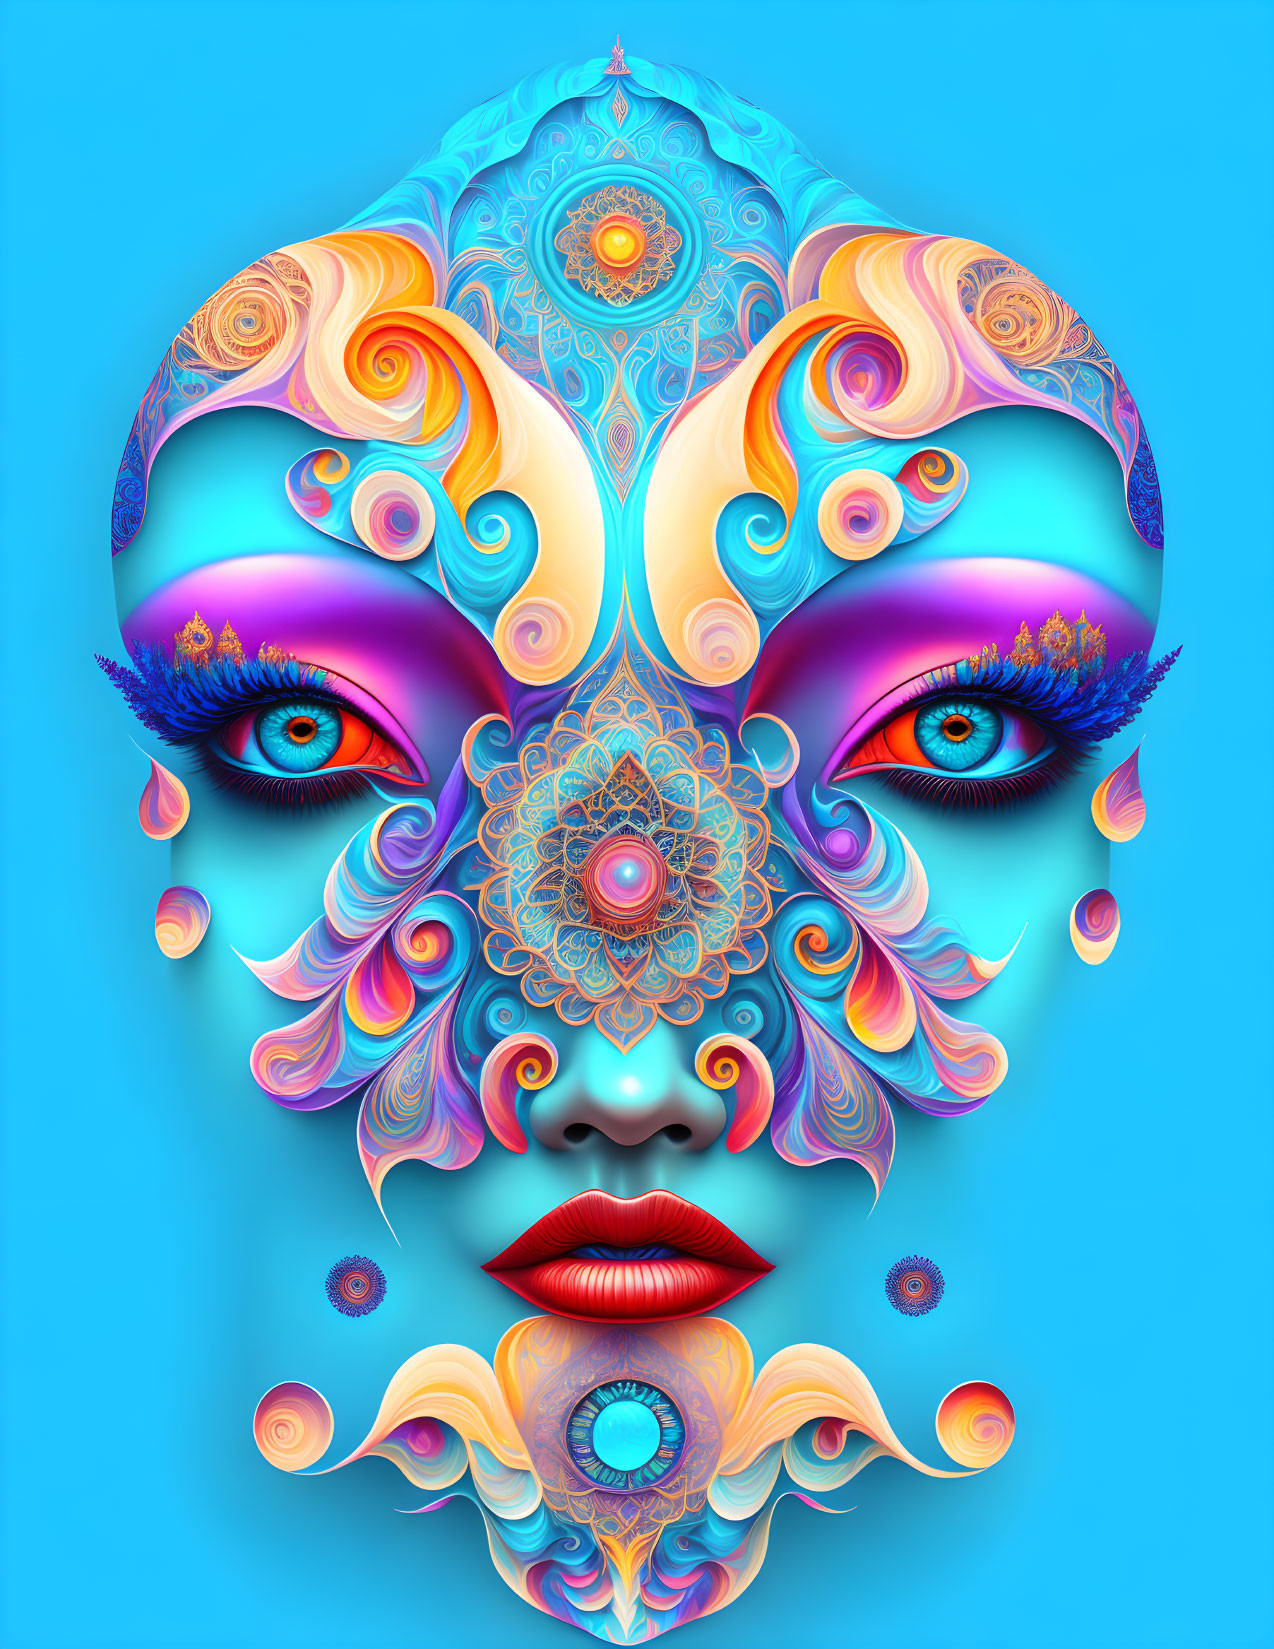 Colorful Psychedelic Face Illustration with Ornate Patterns on Blue Background